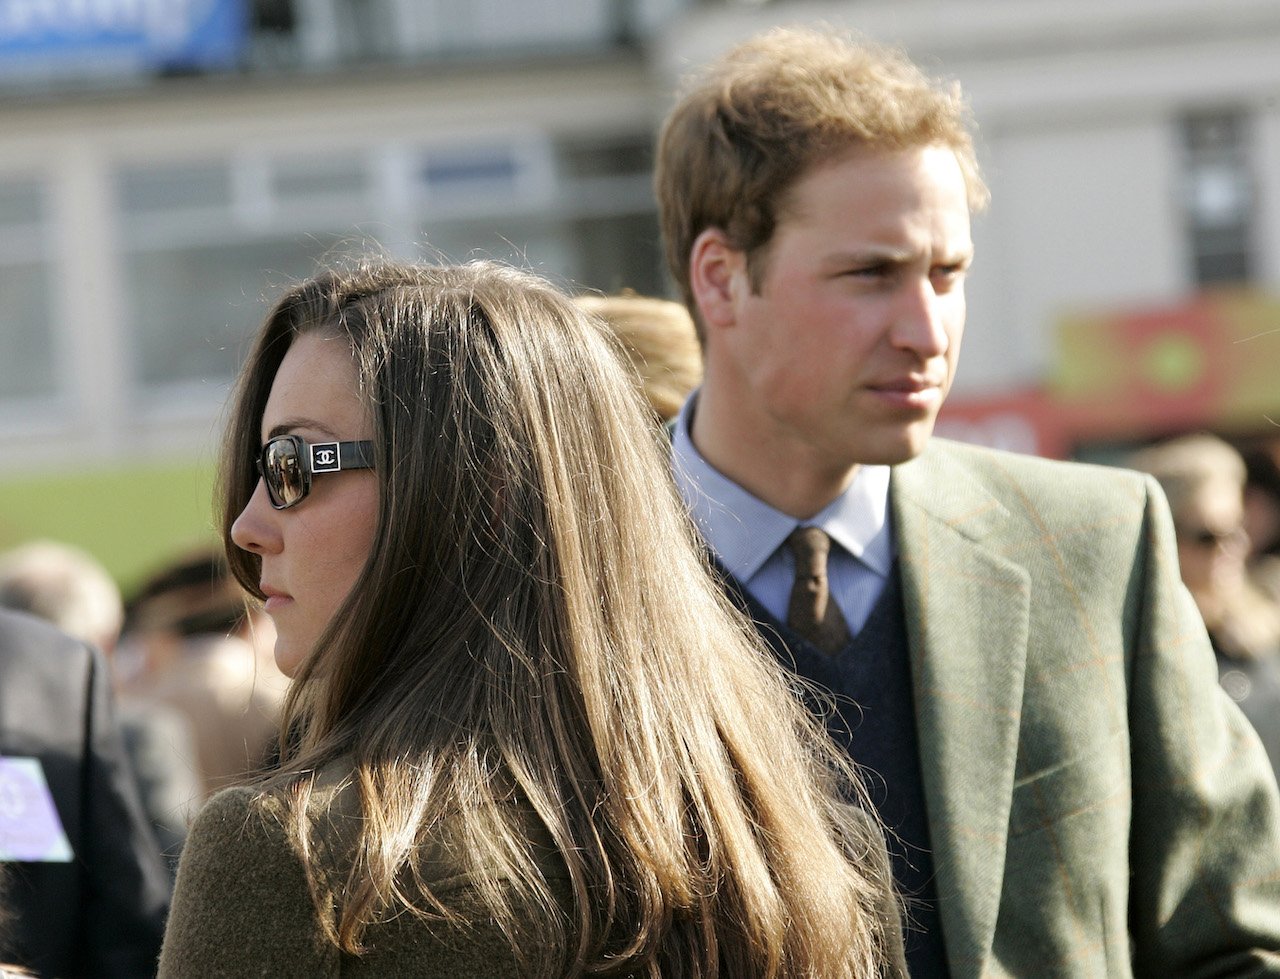 Prince William and Kate Middleton in 2007 at the first day of the Cheltenham Festival Race Meeting. Their brief split that year was 'horrifying' to a former royal butler.